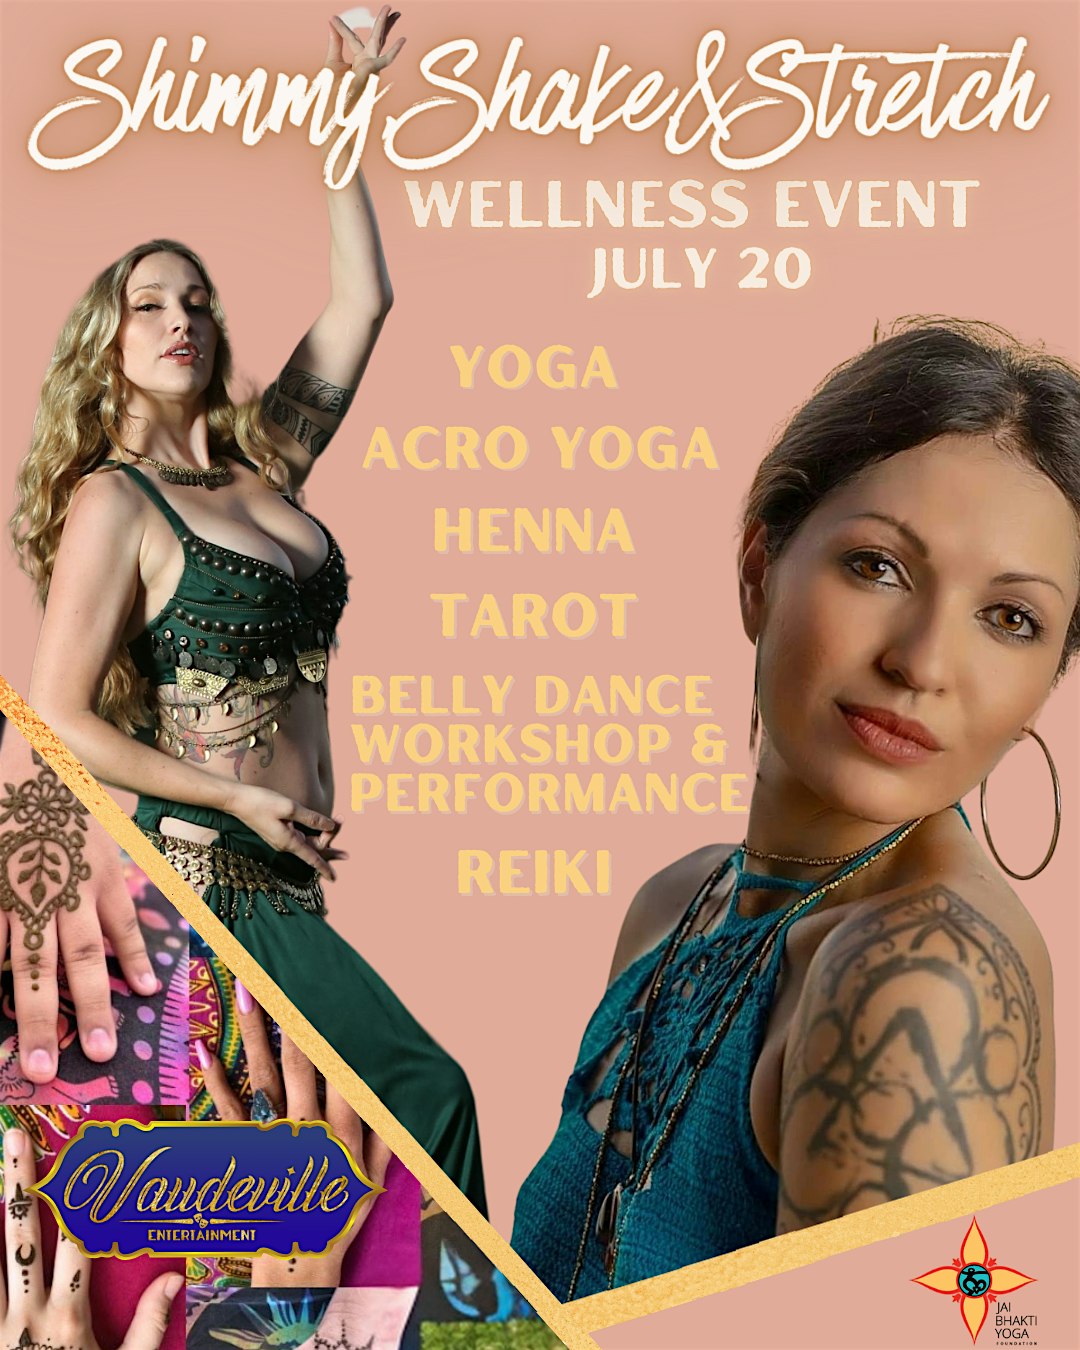 Shimmy, Shake, and Stretch Wellness Event